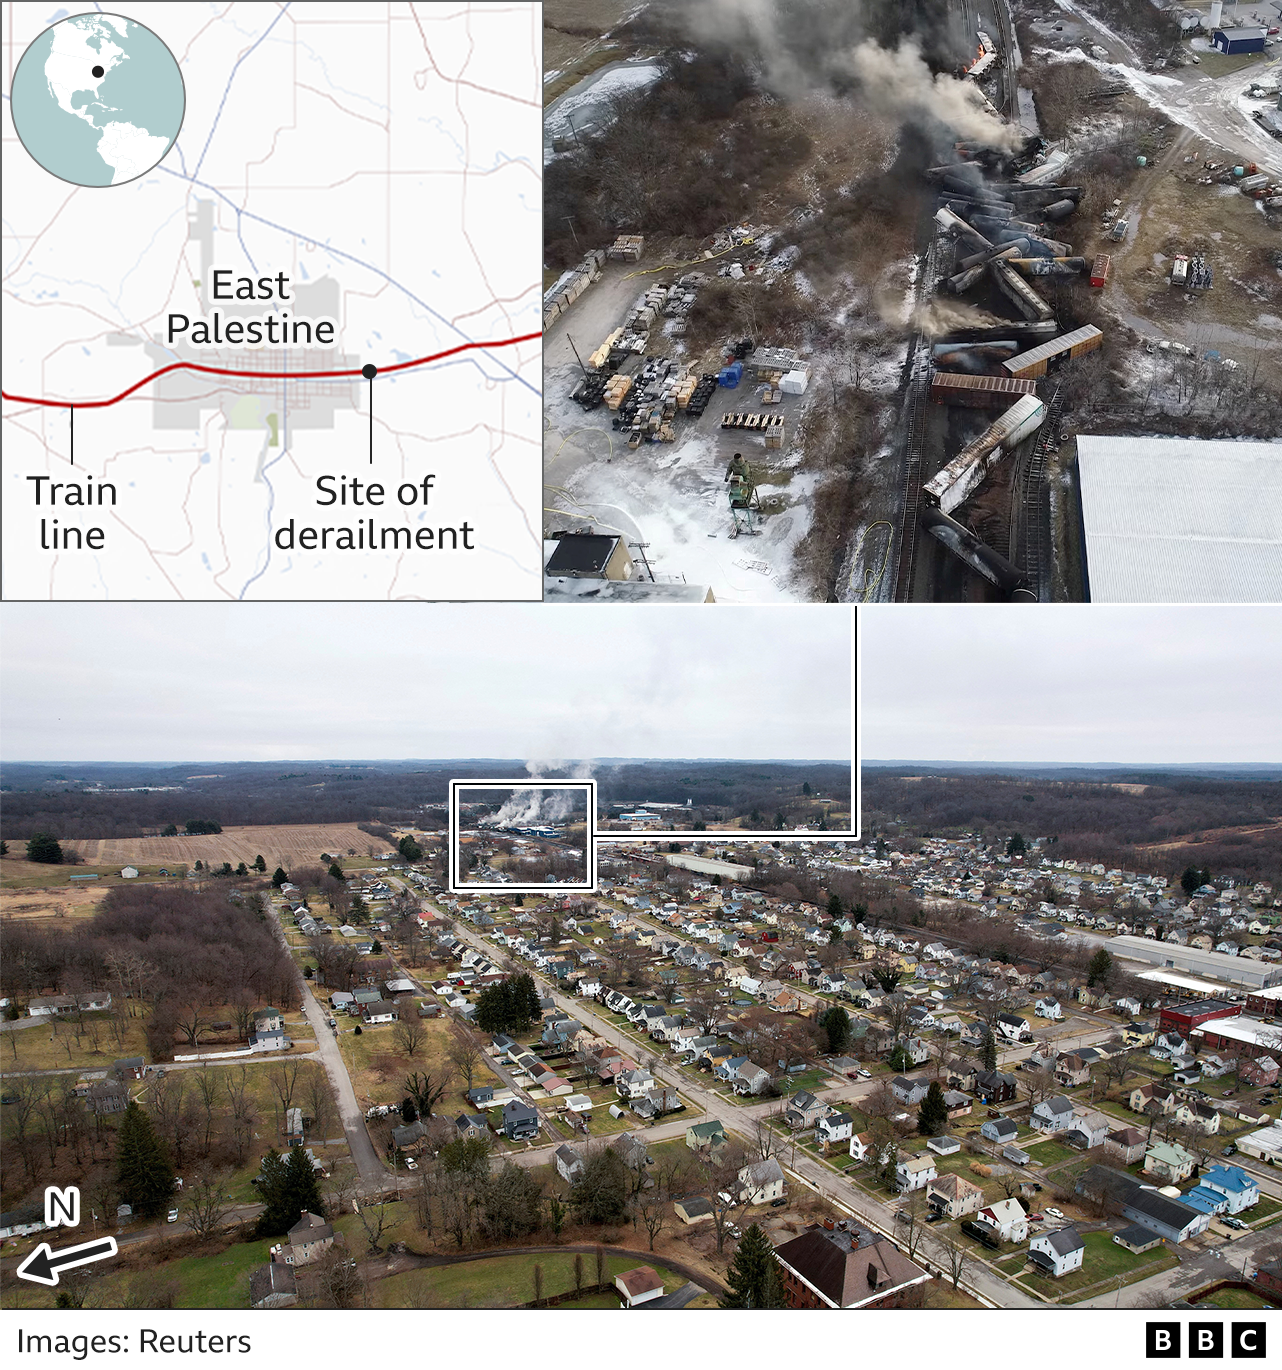 Map of East Palestine and the train derailment site